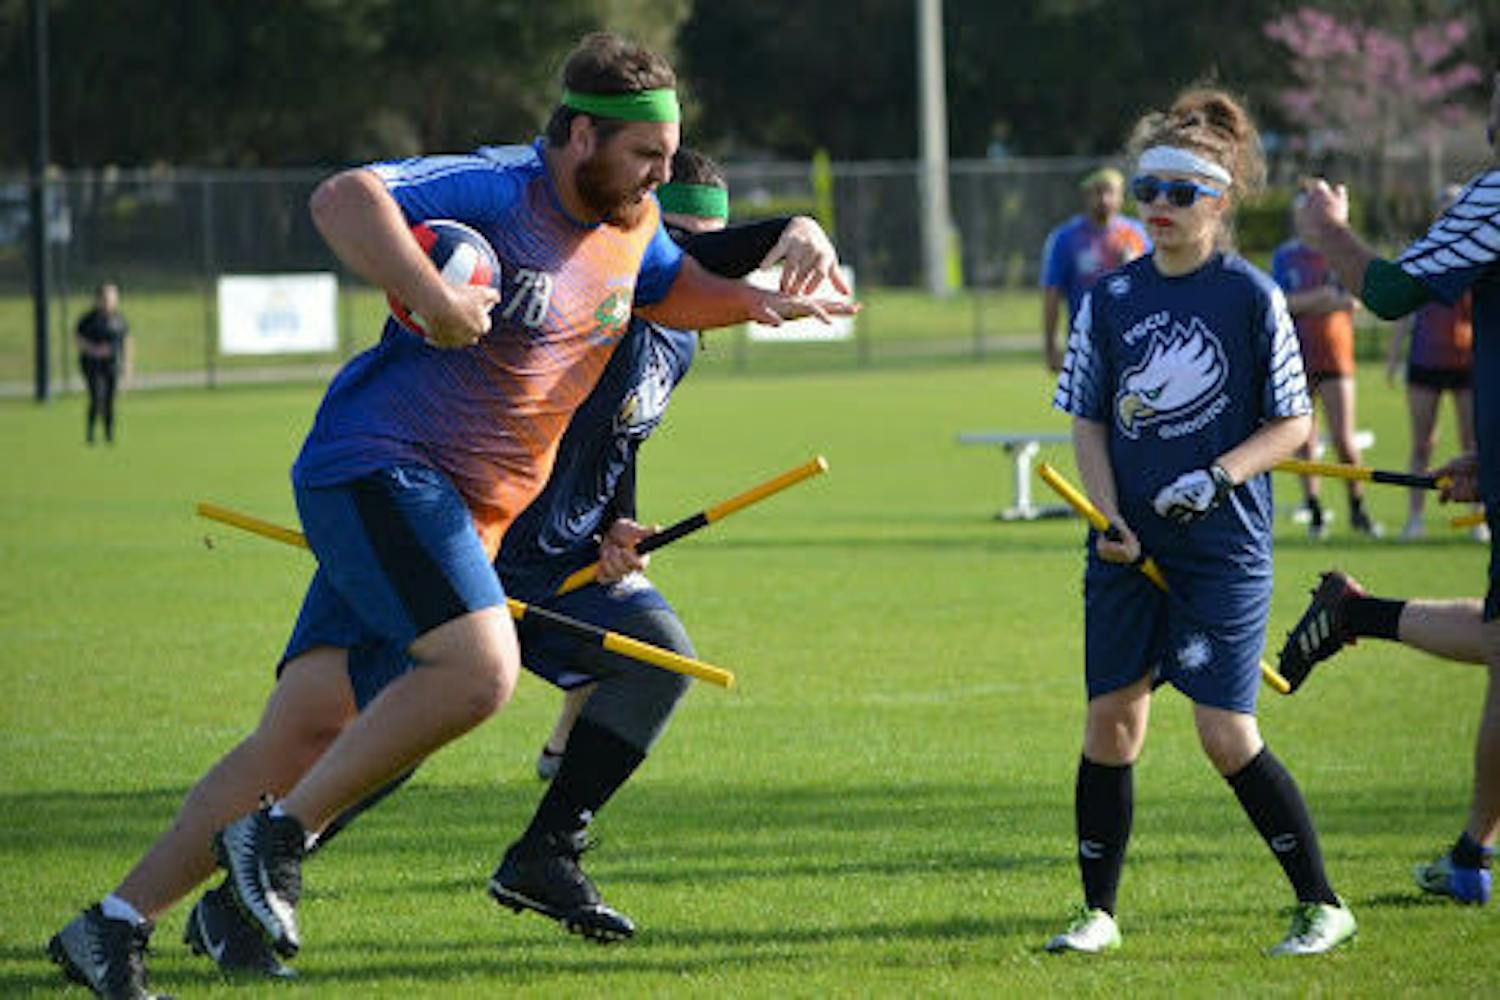 Team captain of the UF Quidditch team Jeremy Kowkabany, a 21-year-old UF astrophysics junior, runs across the field with the ball.